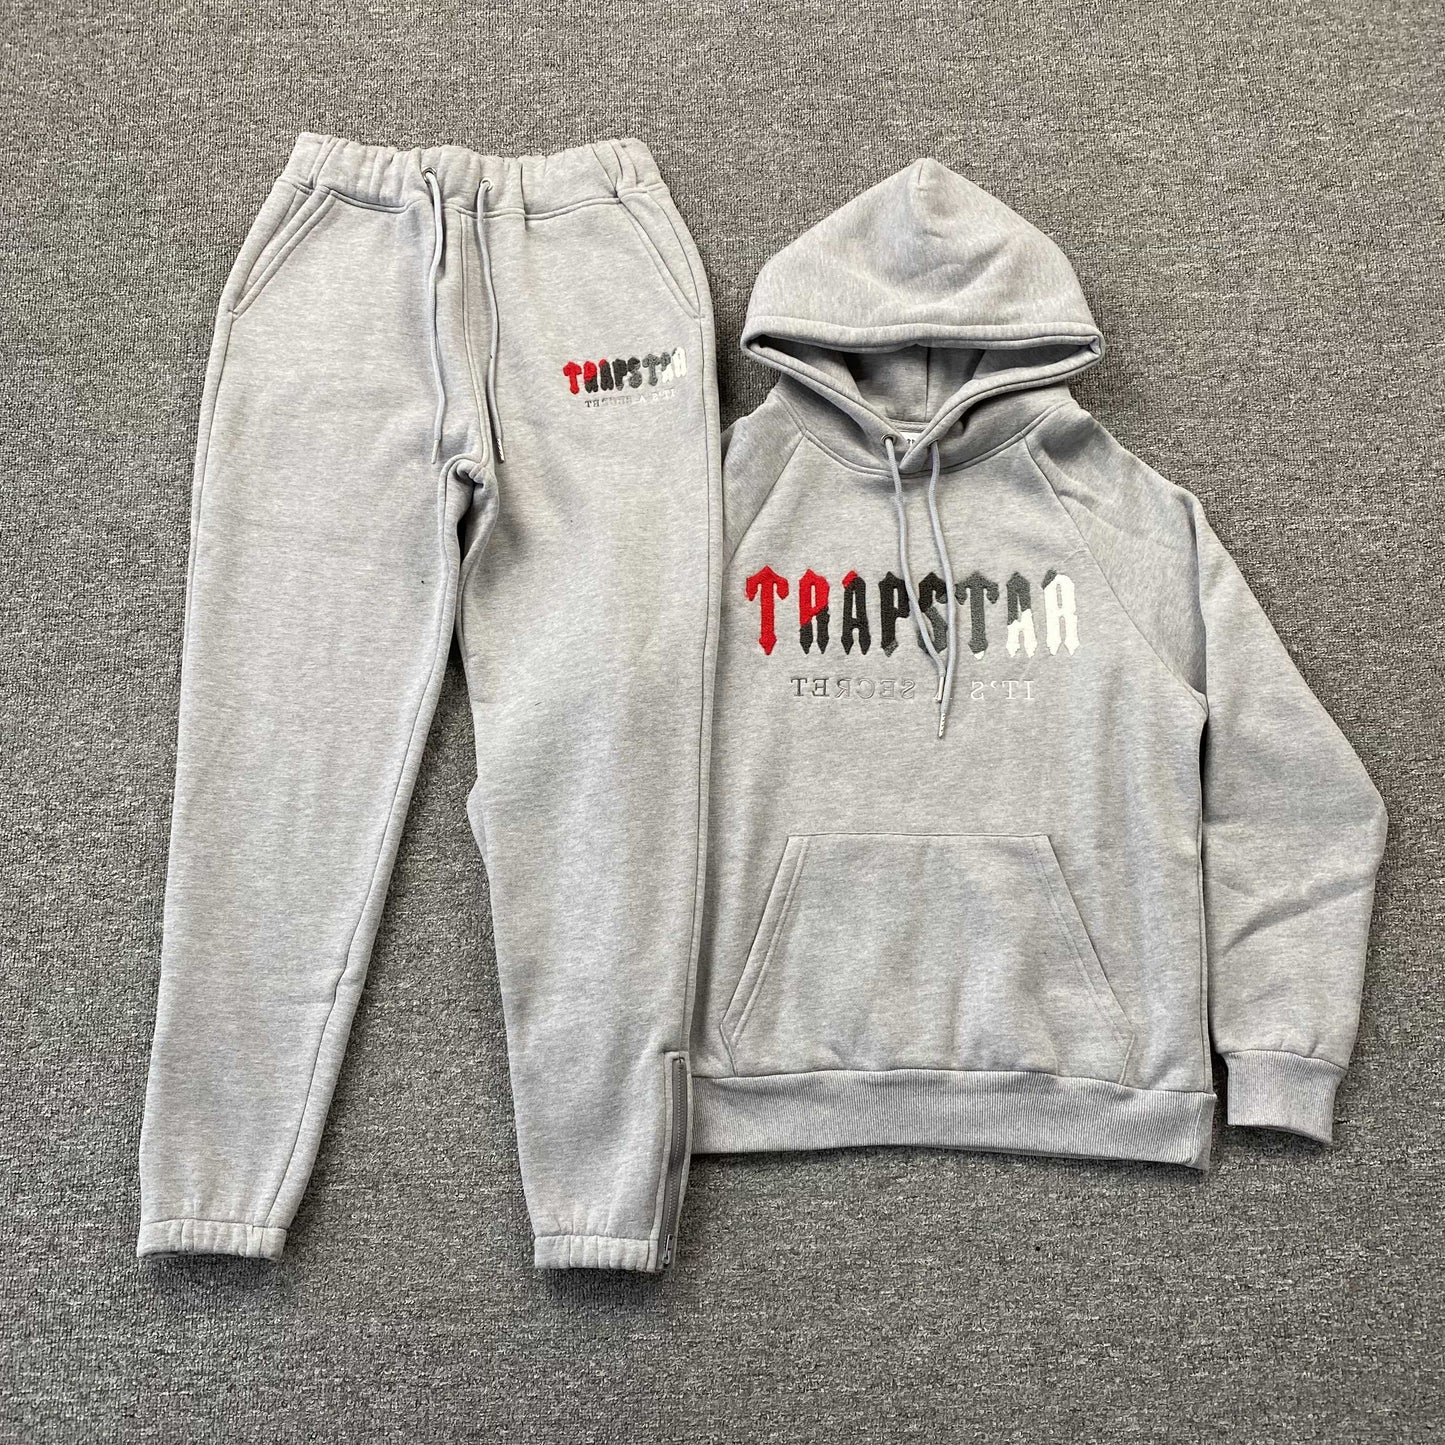 Trapstar Hoodie and Pants - 5